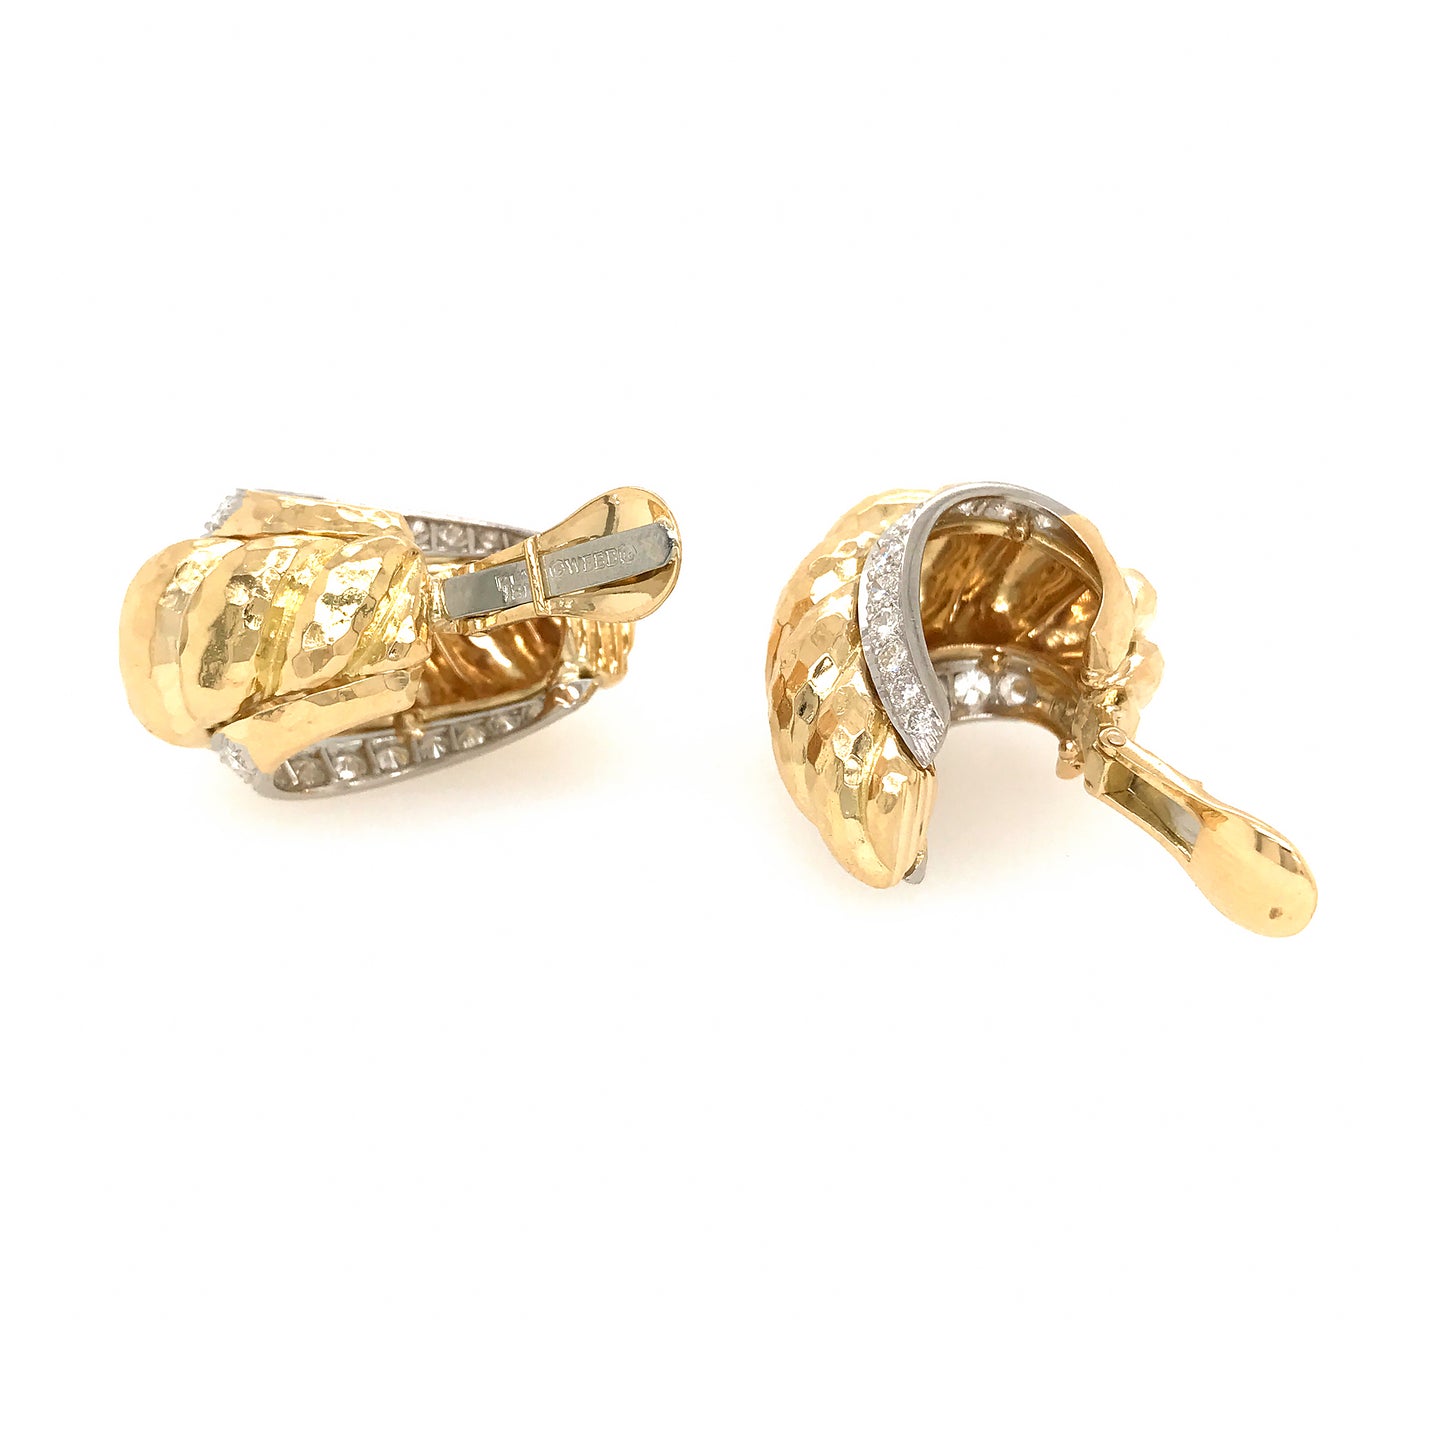 Load image into Gallery viewer, DAVID WEBB 18K YELLOW GOLD AND PLATINUM VINTAGE DIAMOND EARRINGS
